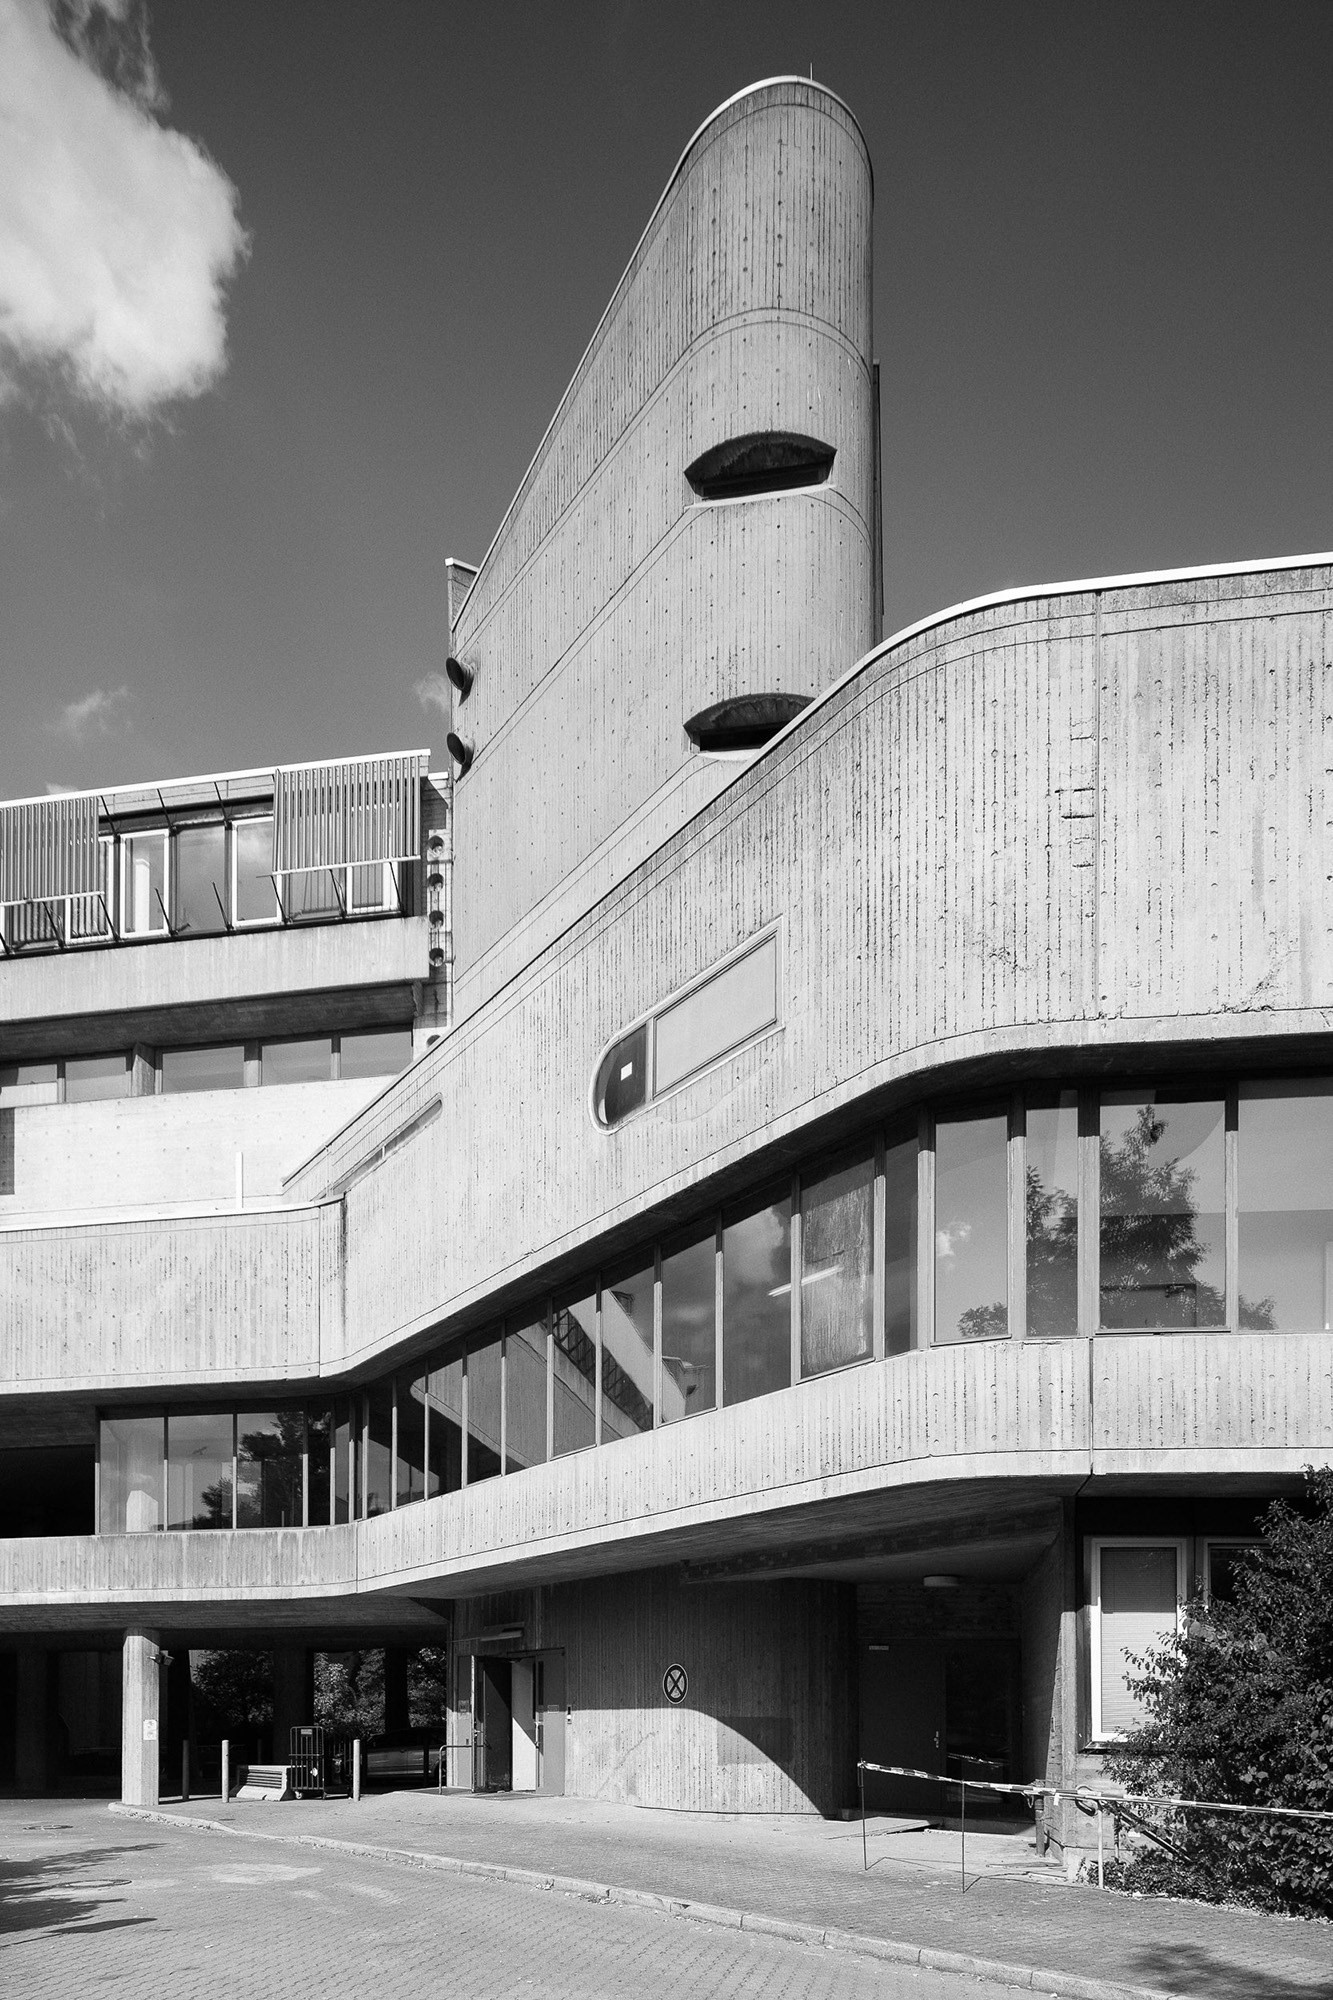 The finest brutalist architecture in London and beyond